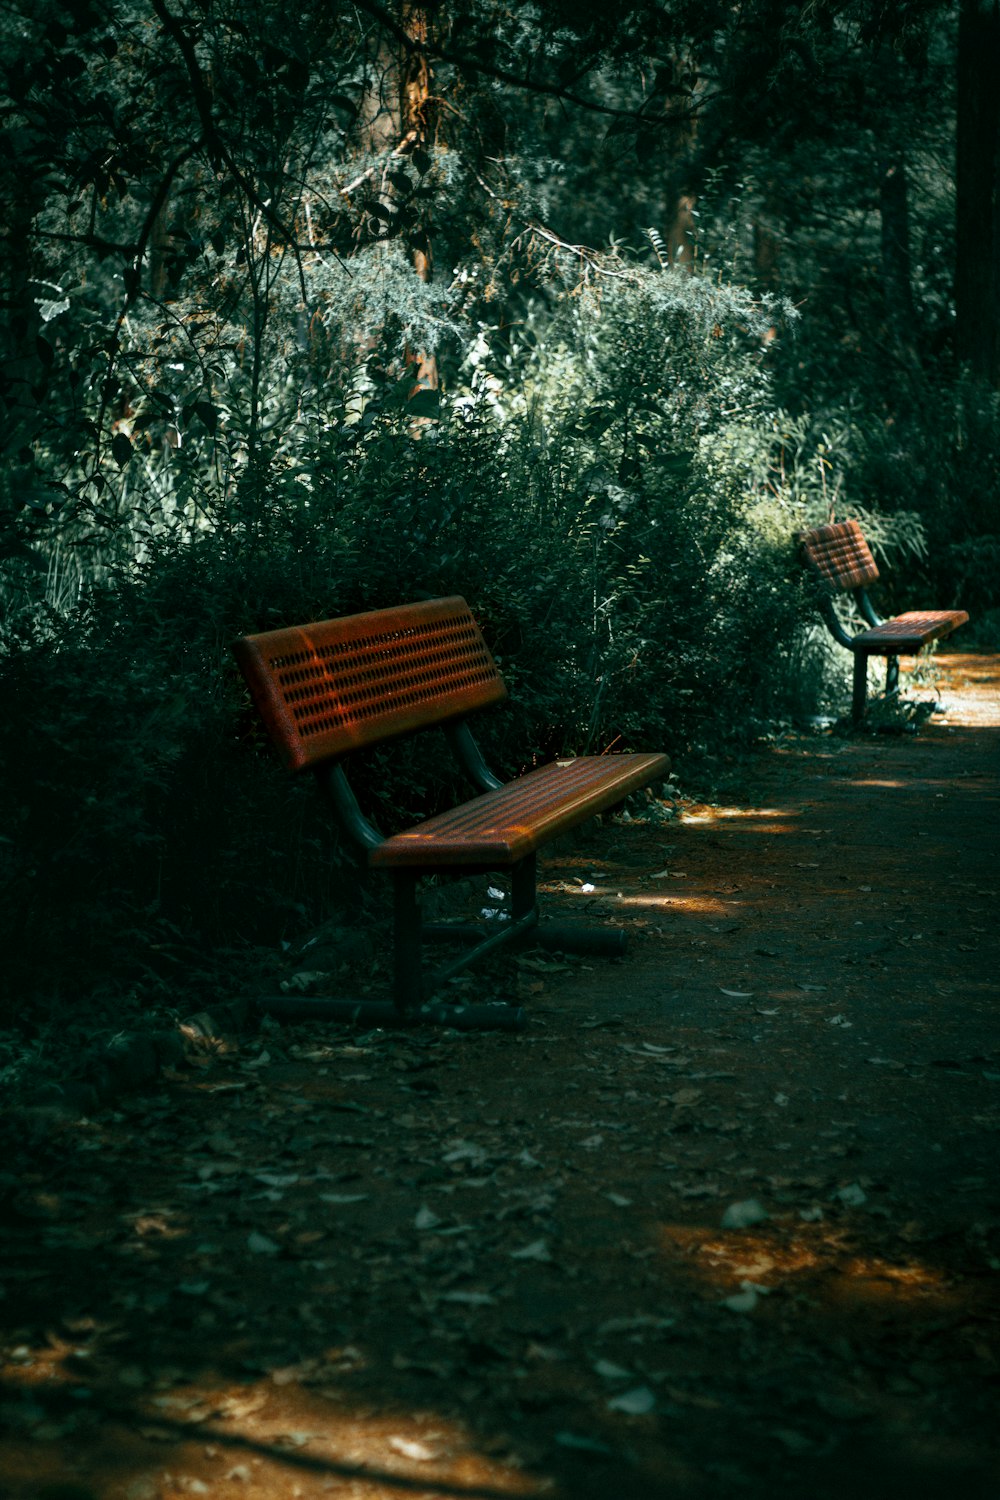 benches in a park